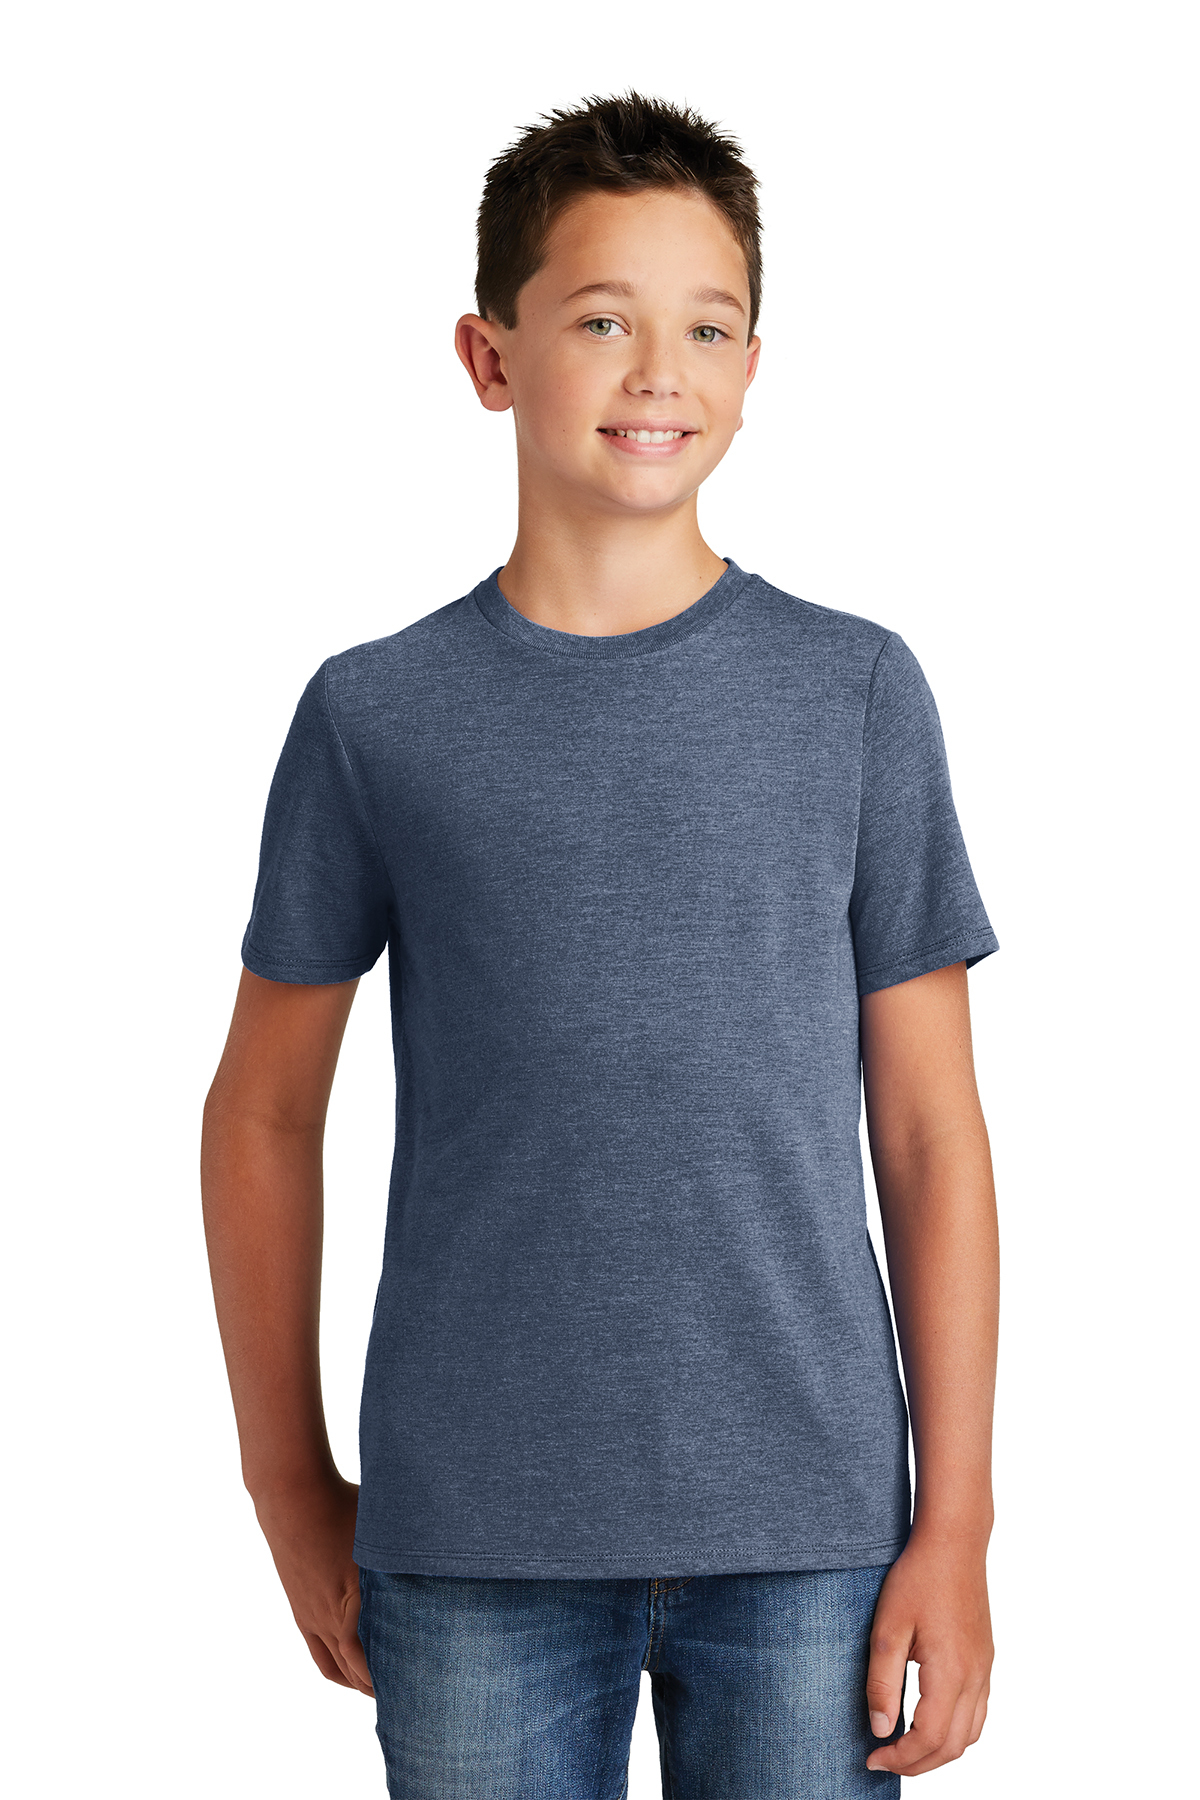 District DT130Y - Youth Perfect Tri Crew Tee